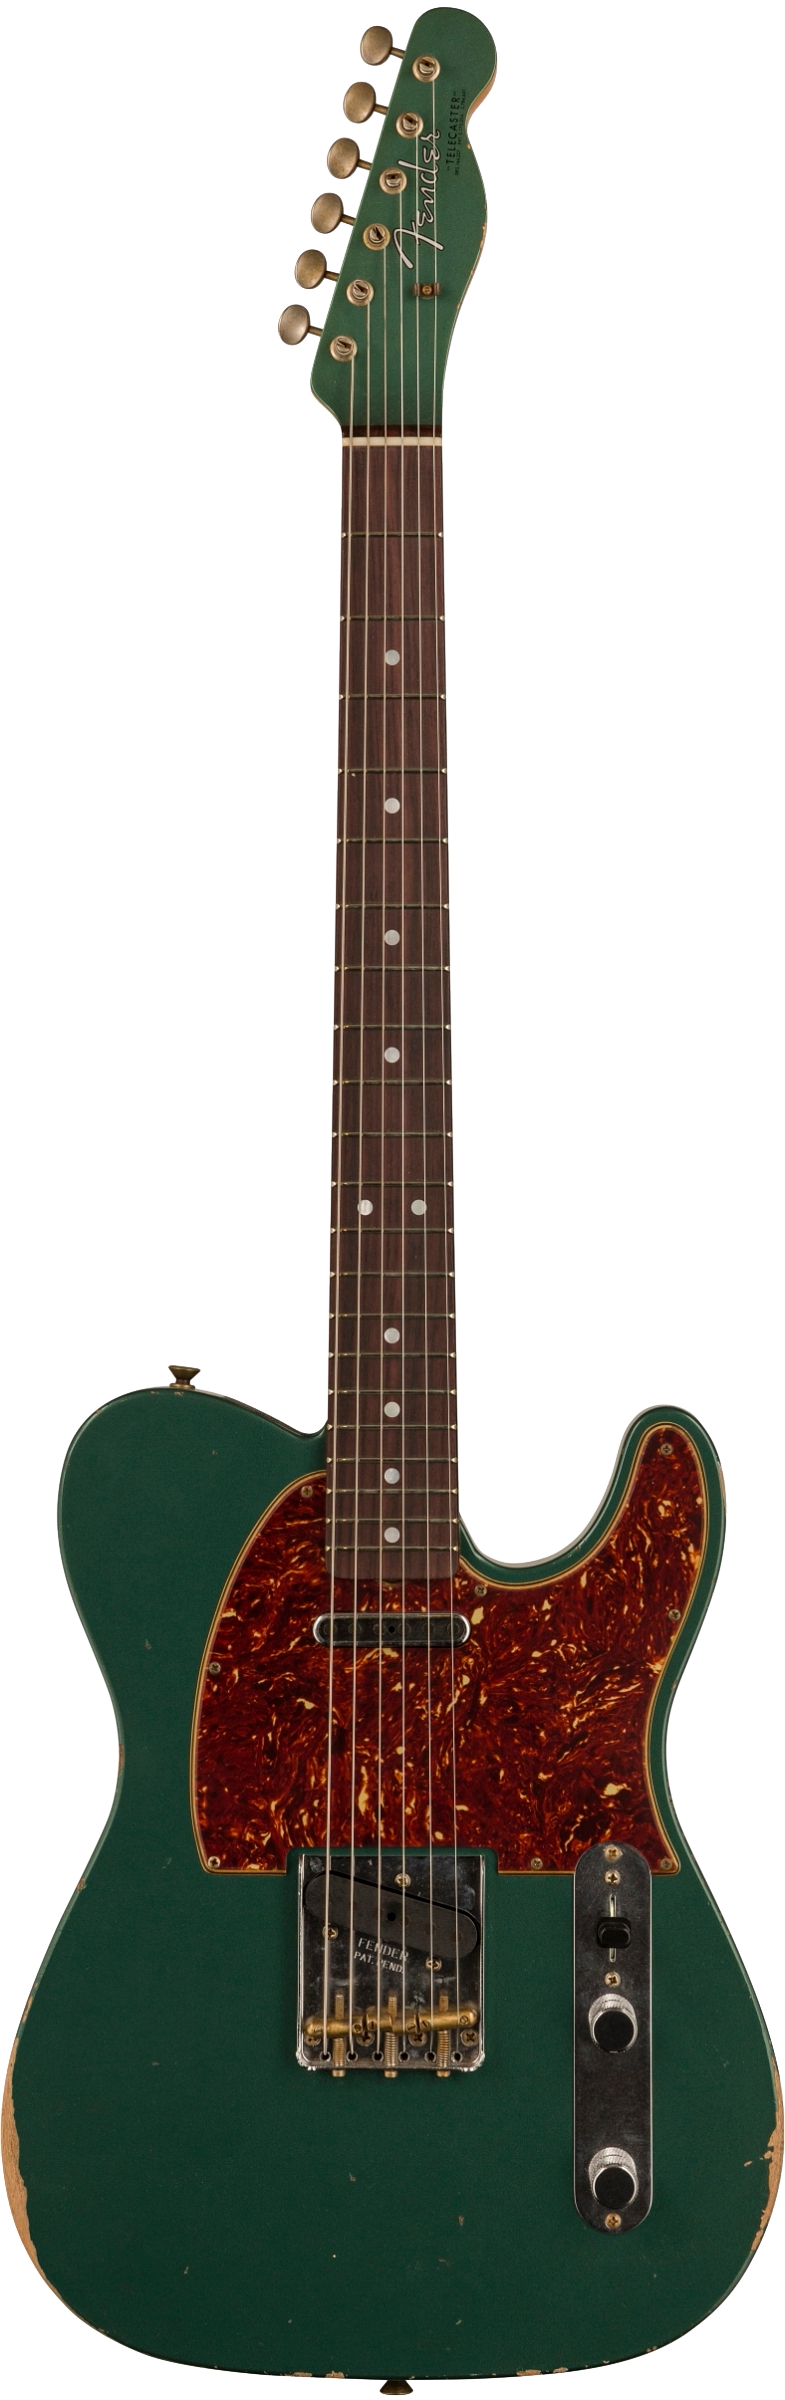 Full frontal of Fender Custom Shop Limited Edition '64 Tele Relic Aged Sherwood Green Metallic.